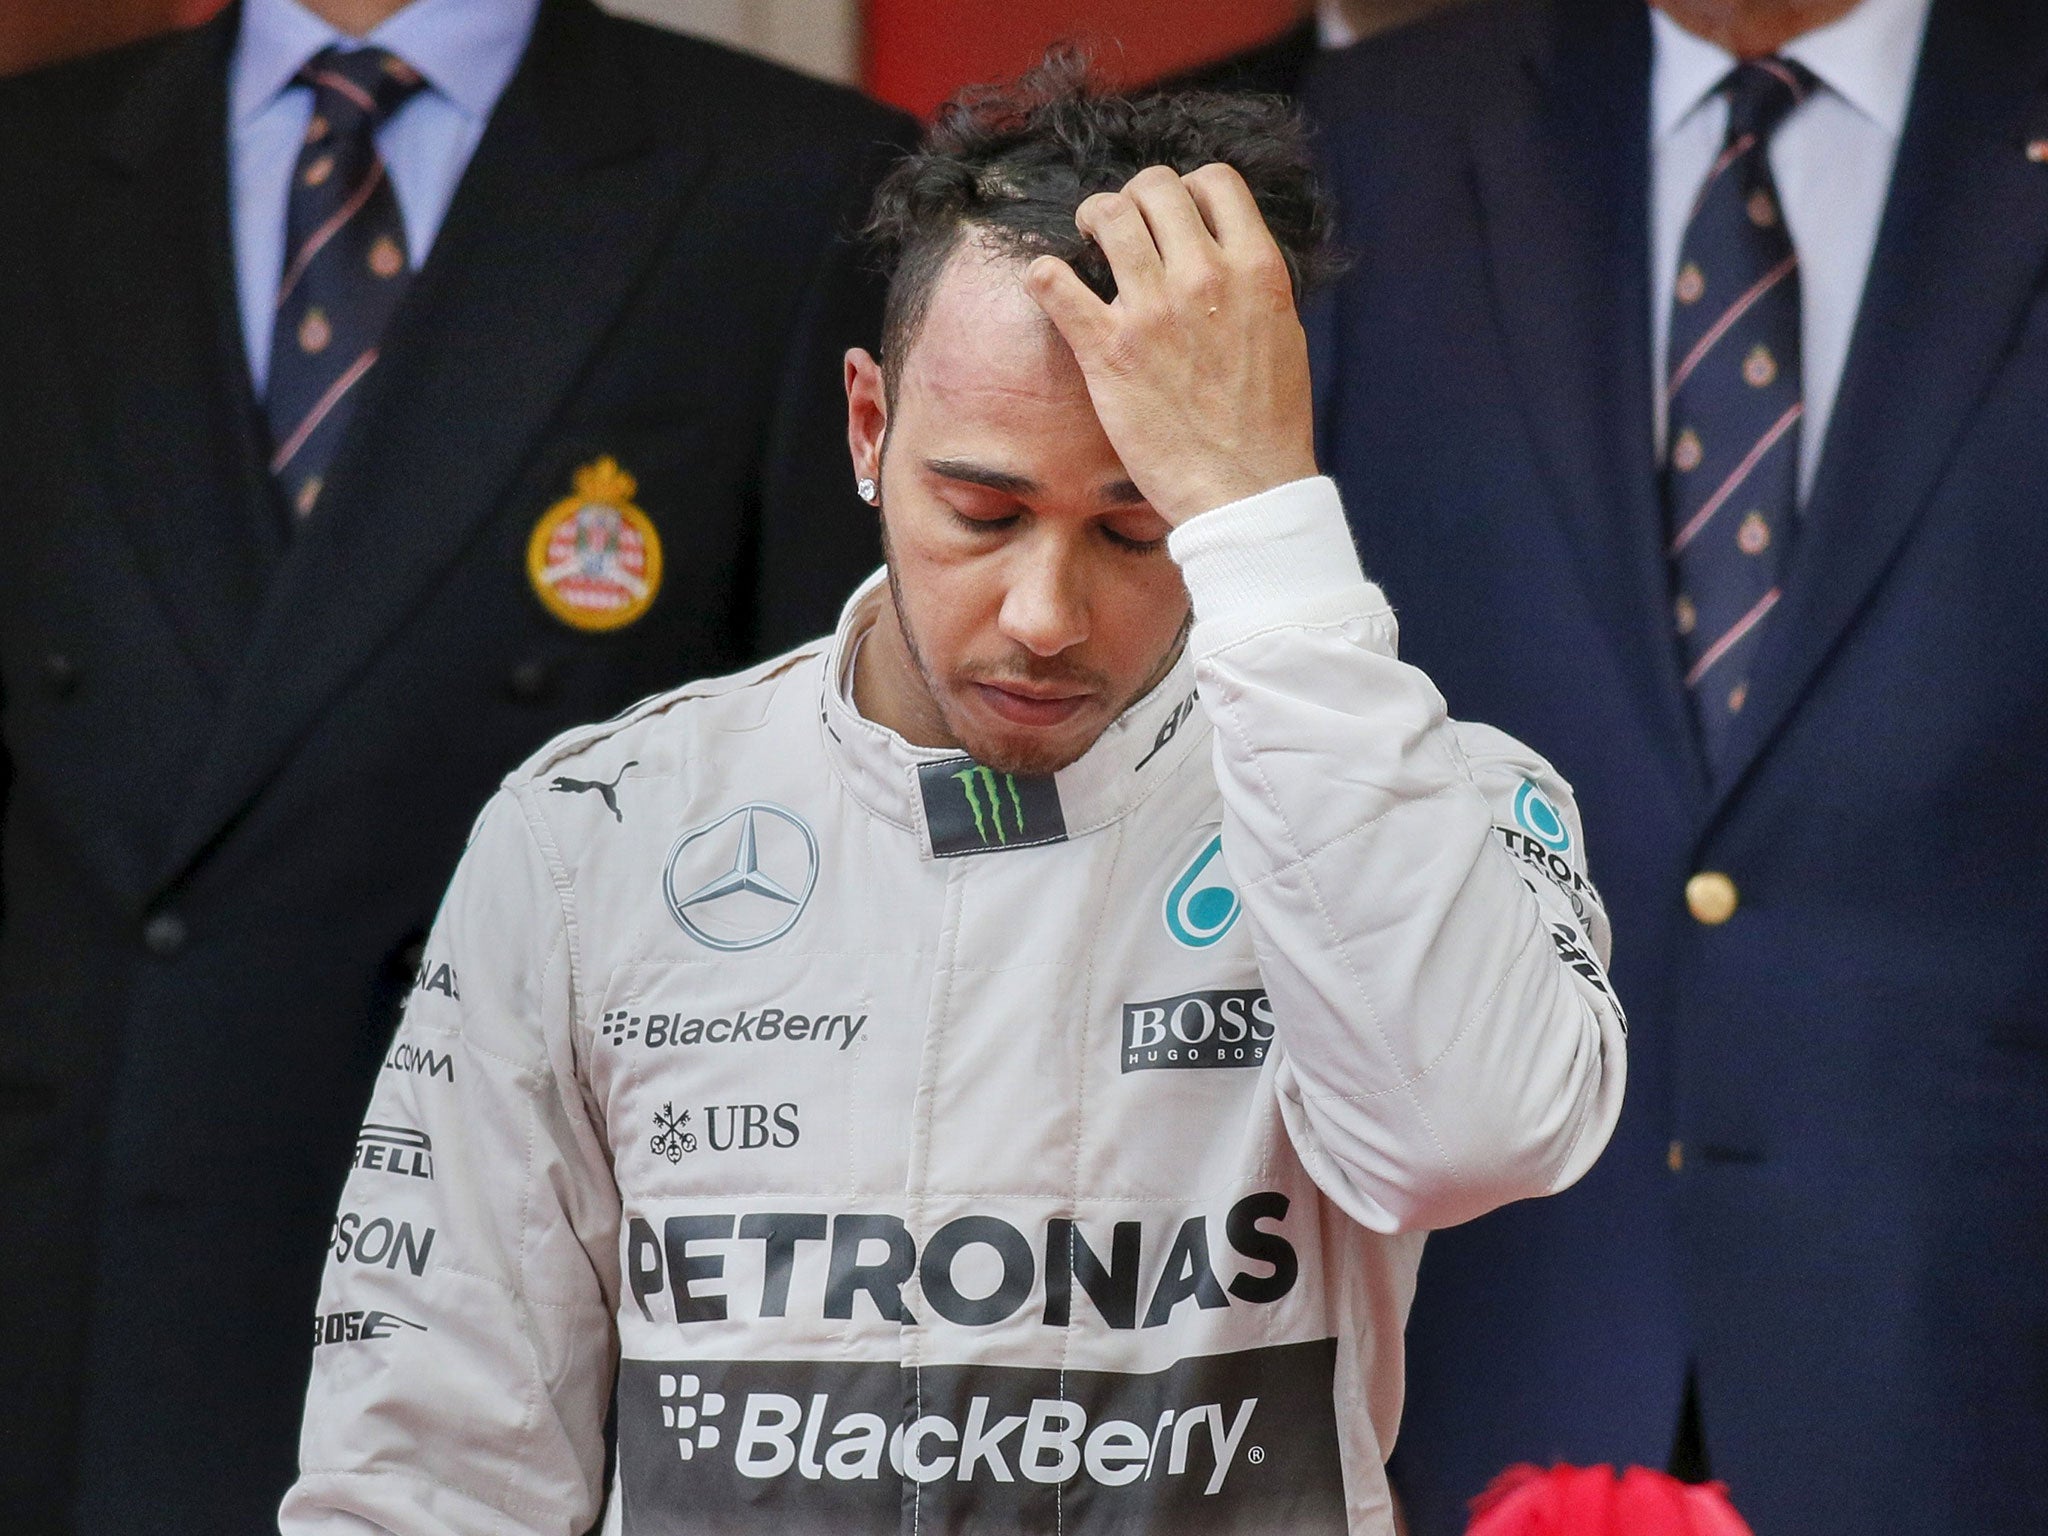 Lewis Hamilton lost the lead at Monaco after a team mix-up